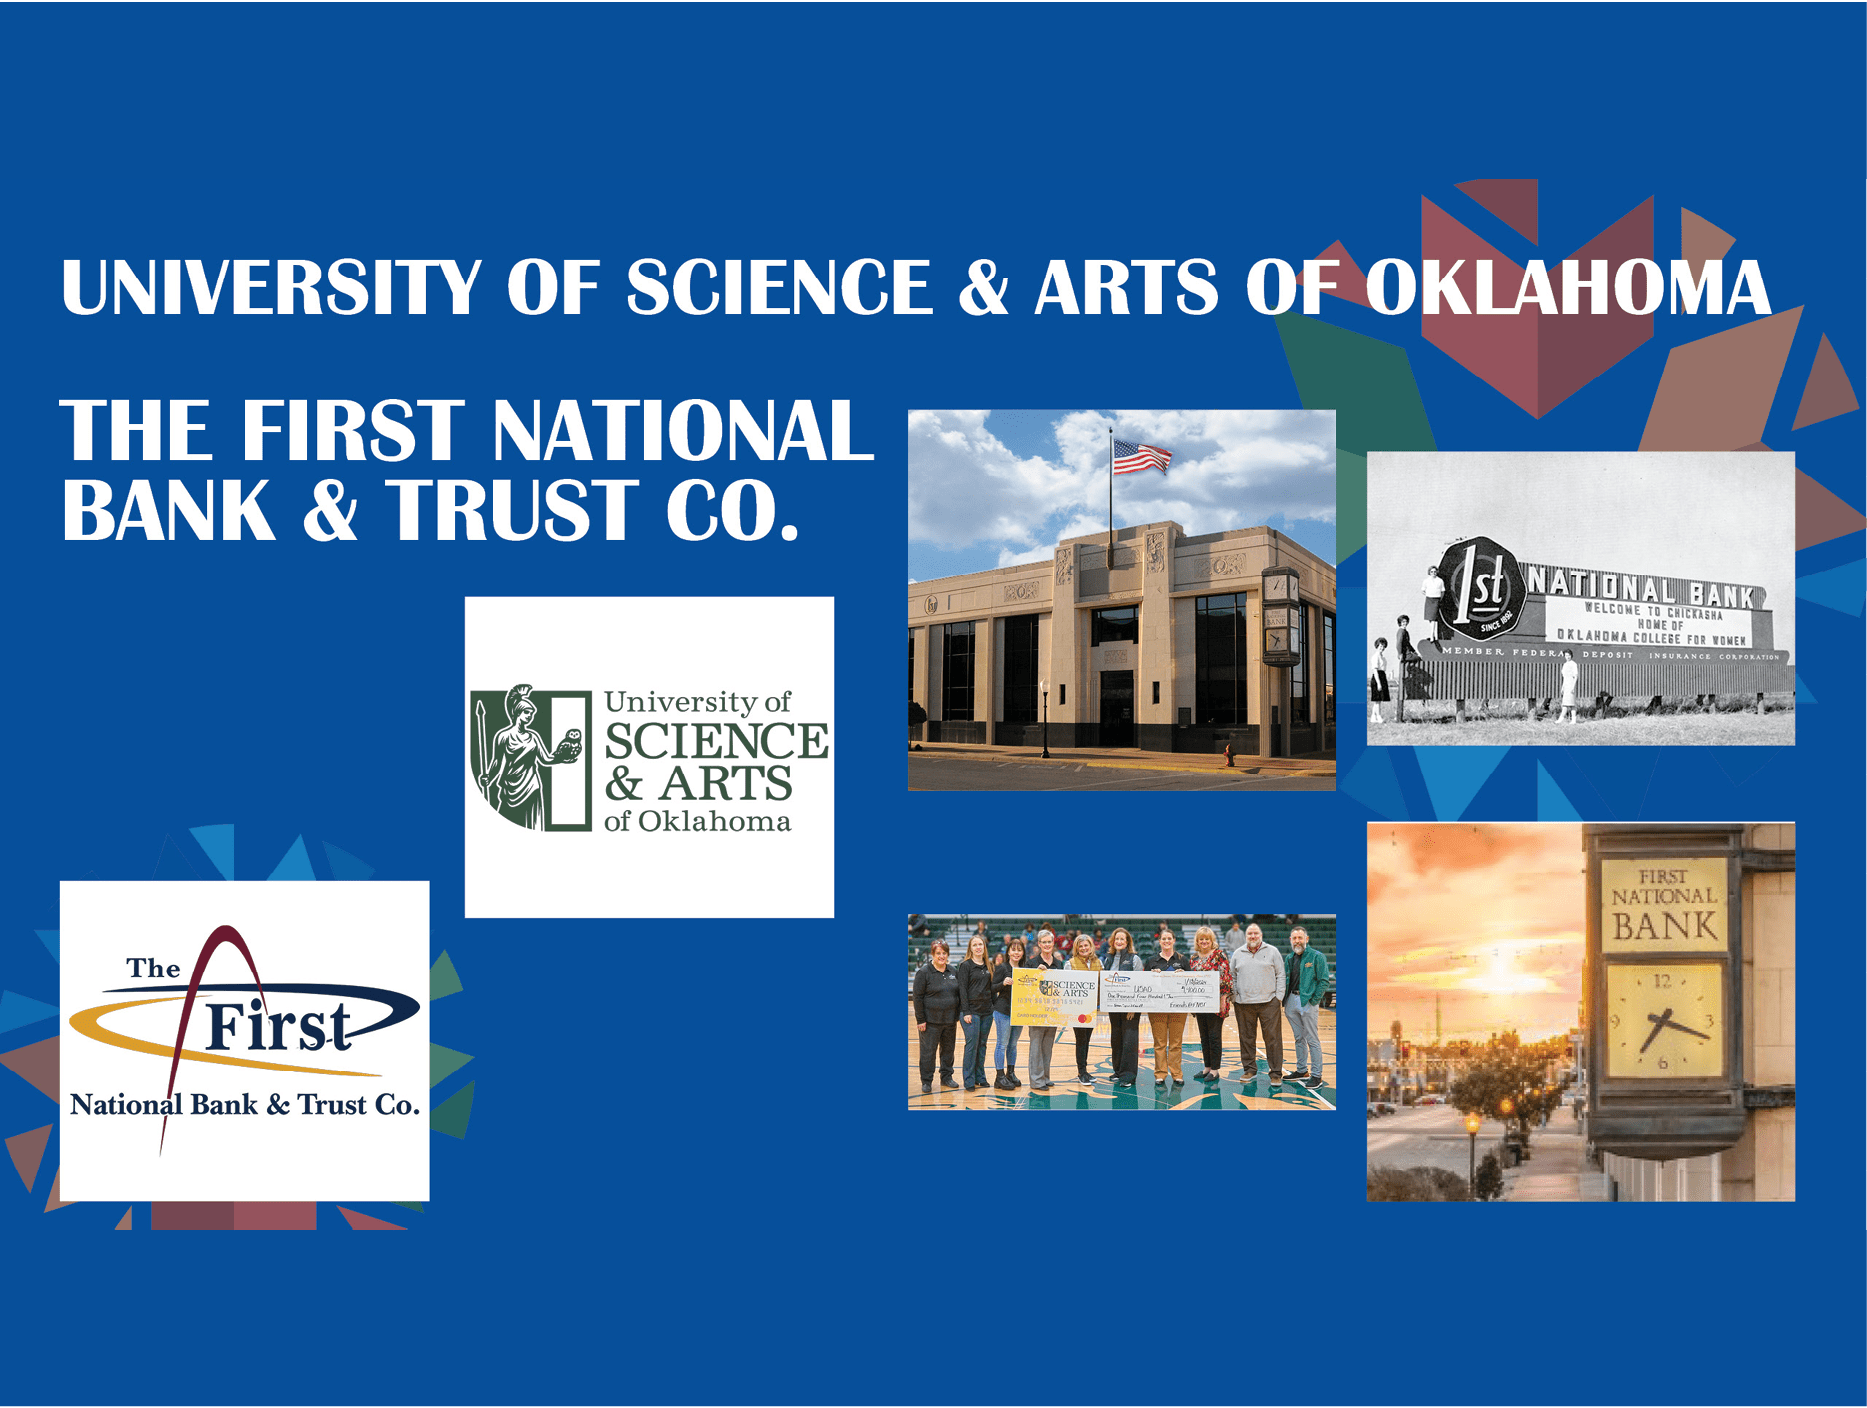 University of Science and Arts of Oklahoma and The First National Bank & Trust Co.